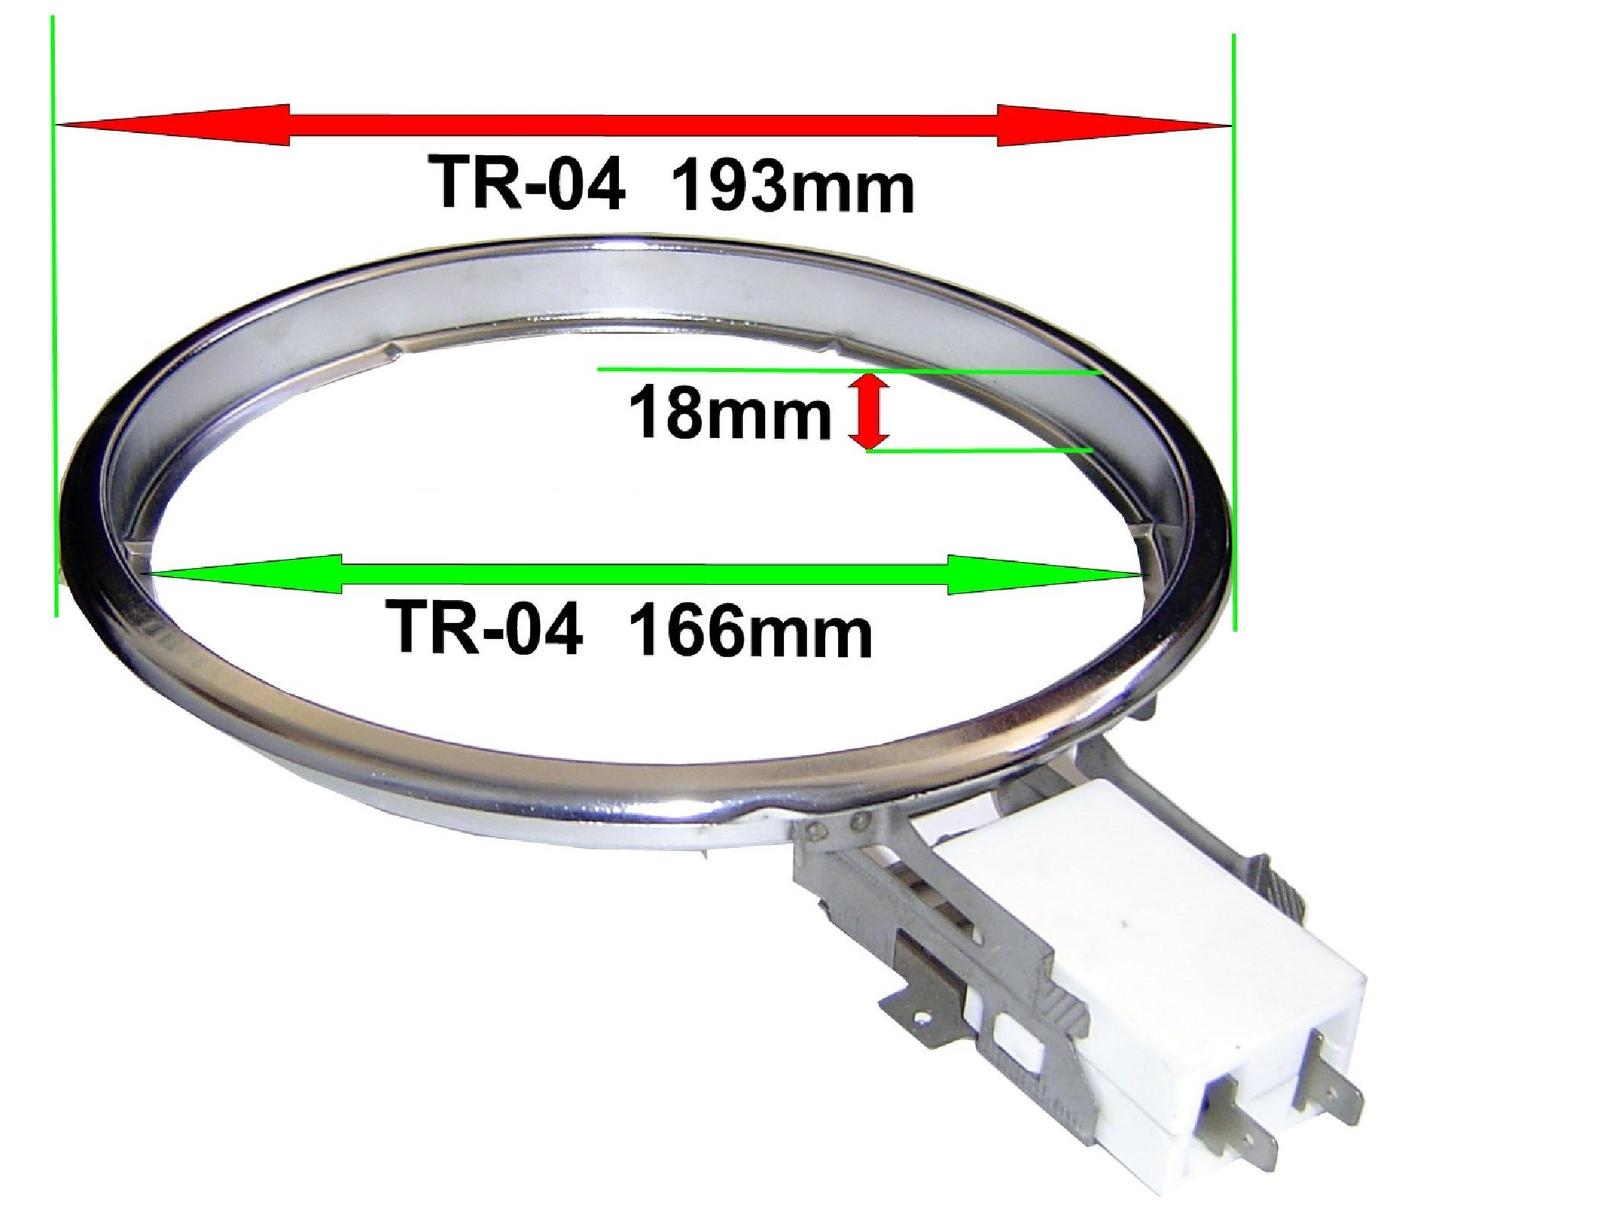 Trim Ring With Socket Attachment | TR-04 / 3501-09 | Suits HP-04 + DP-03 main image